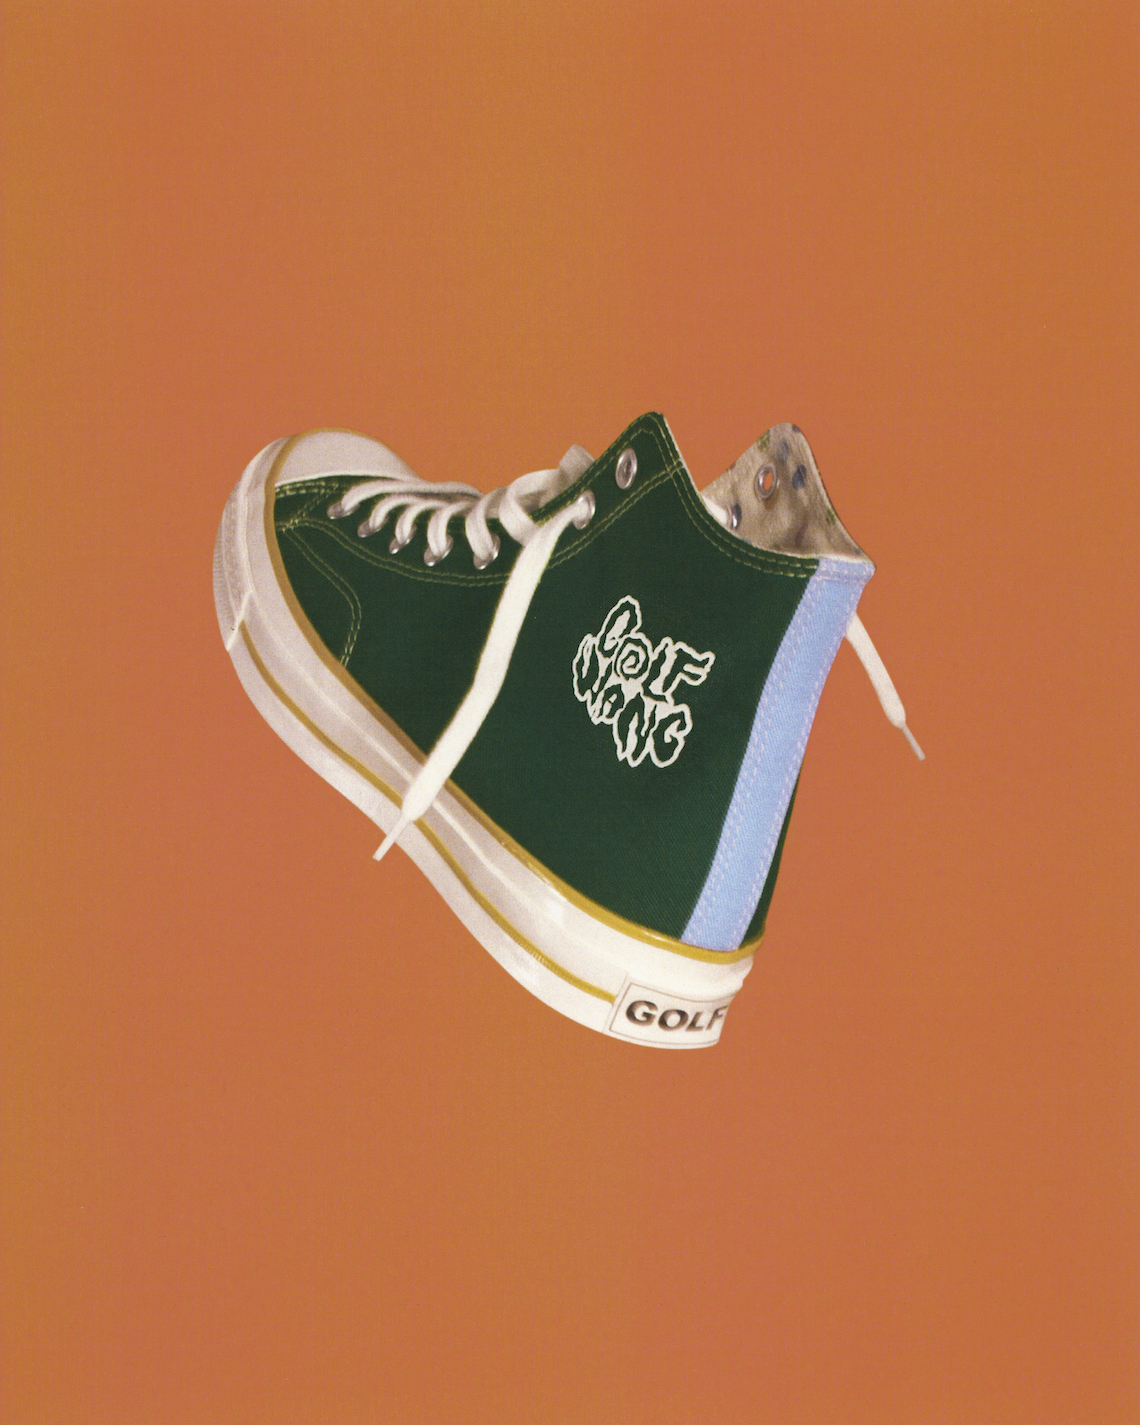 Tyler, The Creator x Converse By You Golf Wang | SneakerNews.com